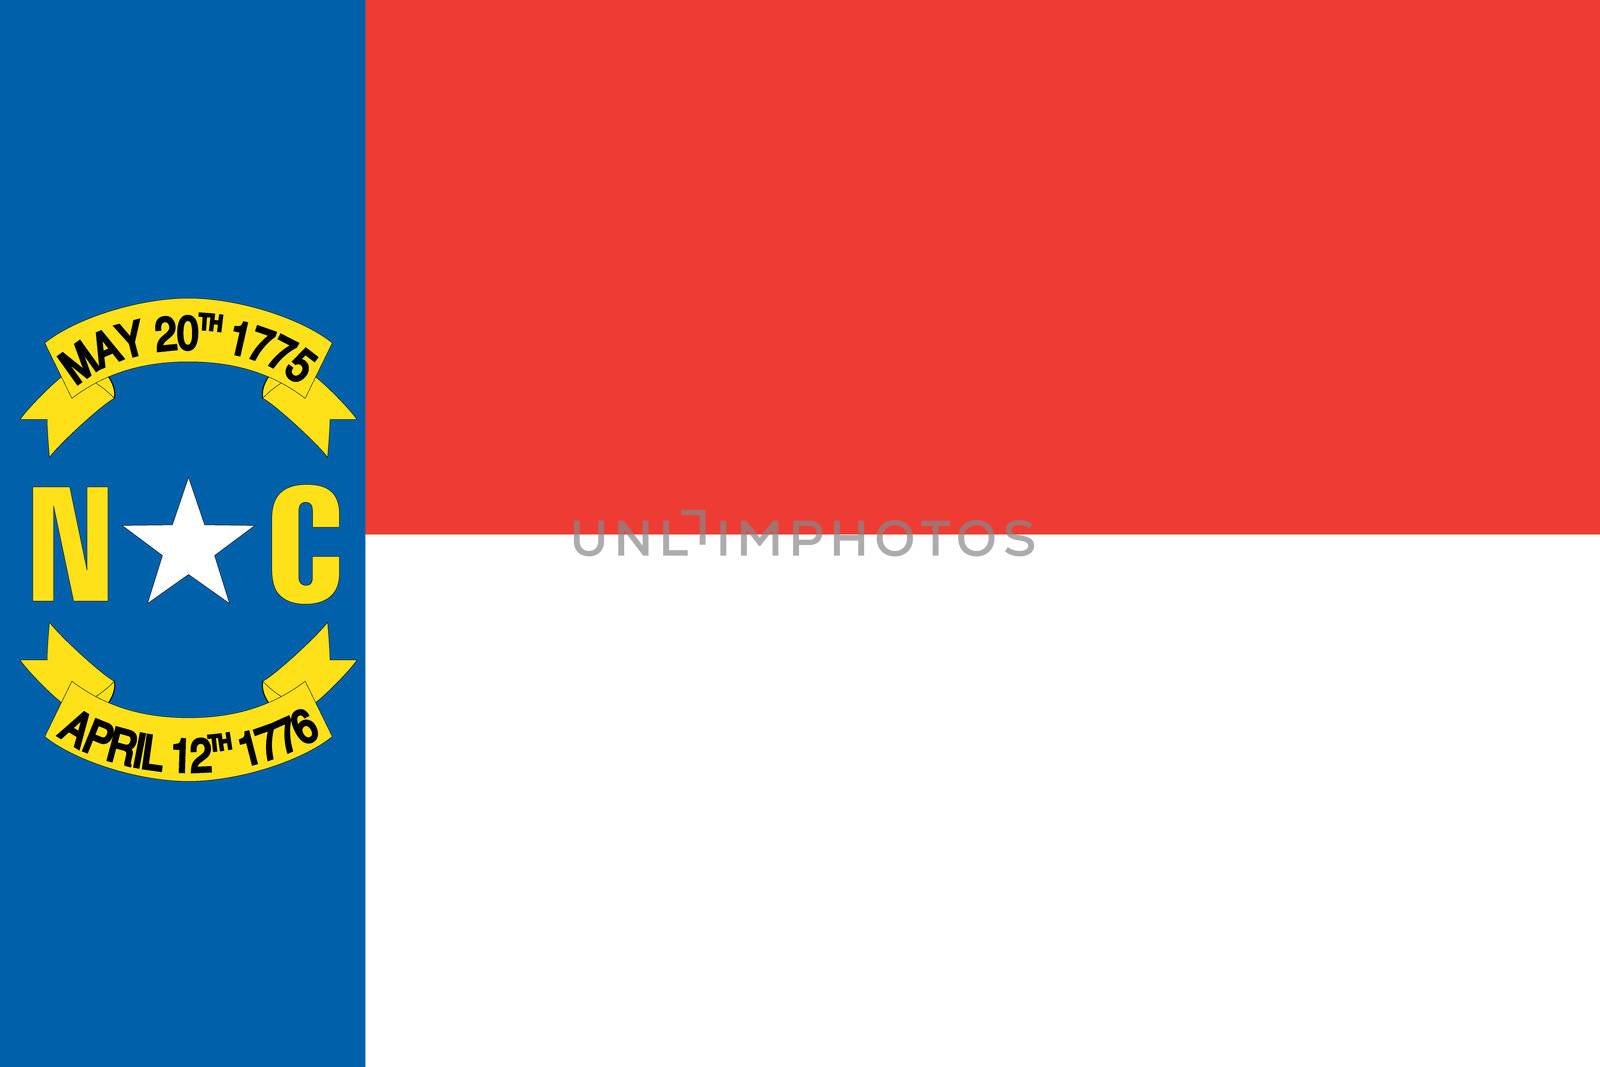 The Flag of the American State of North Carolina